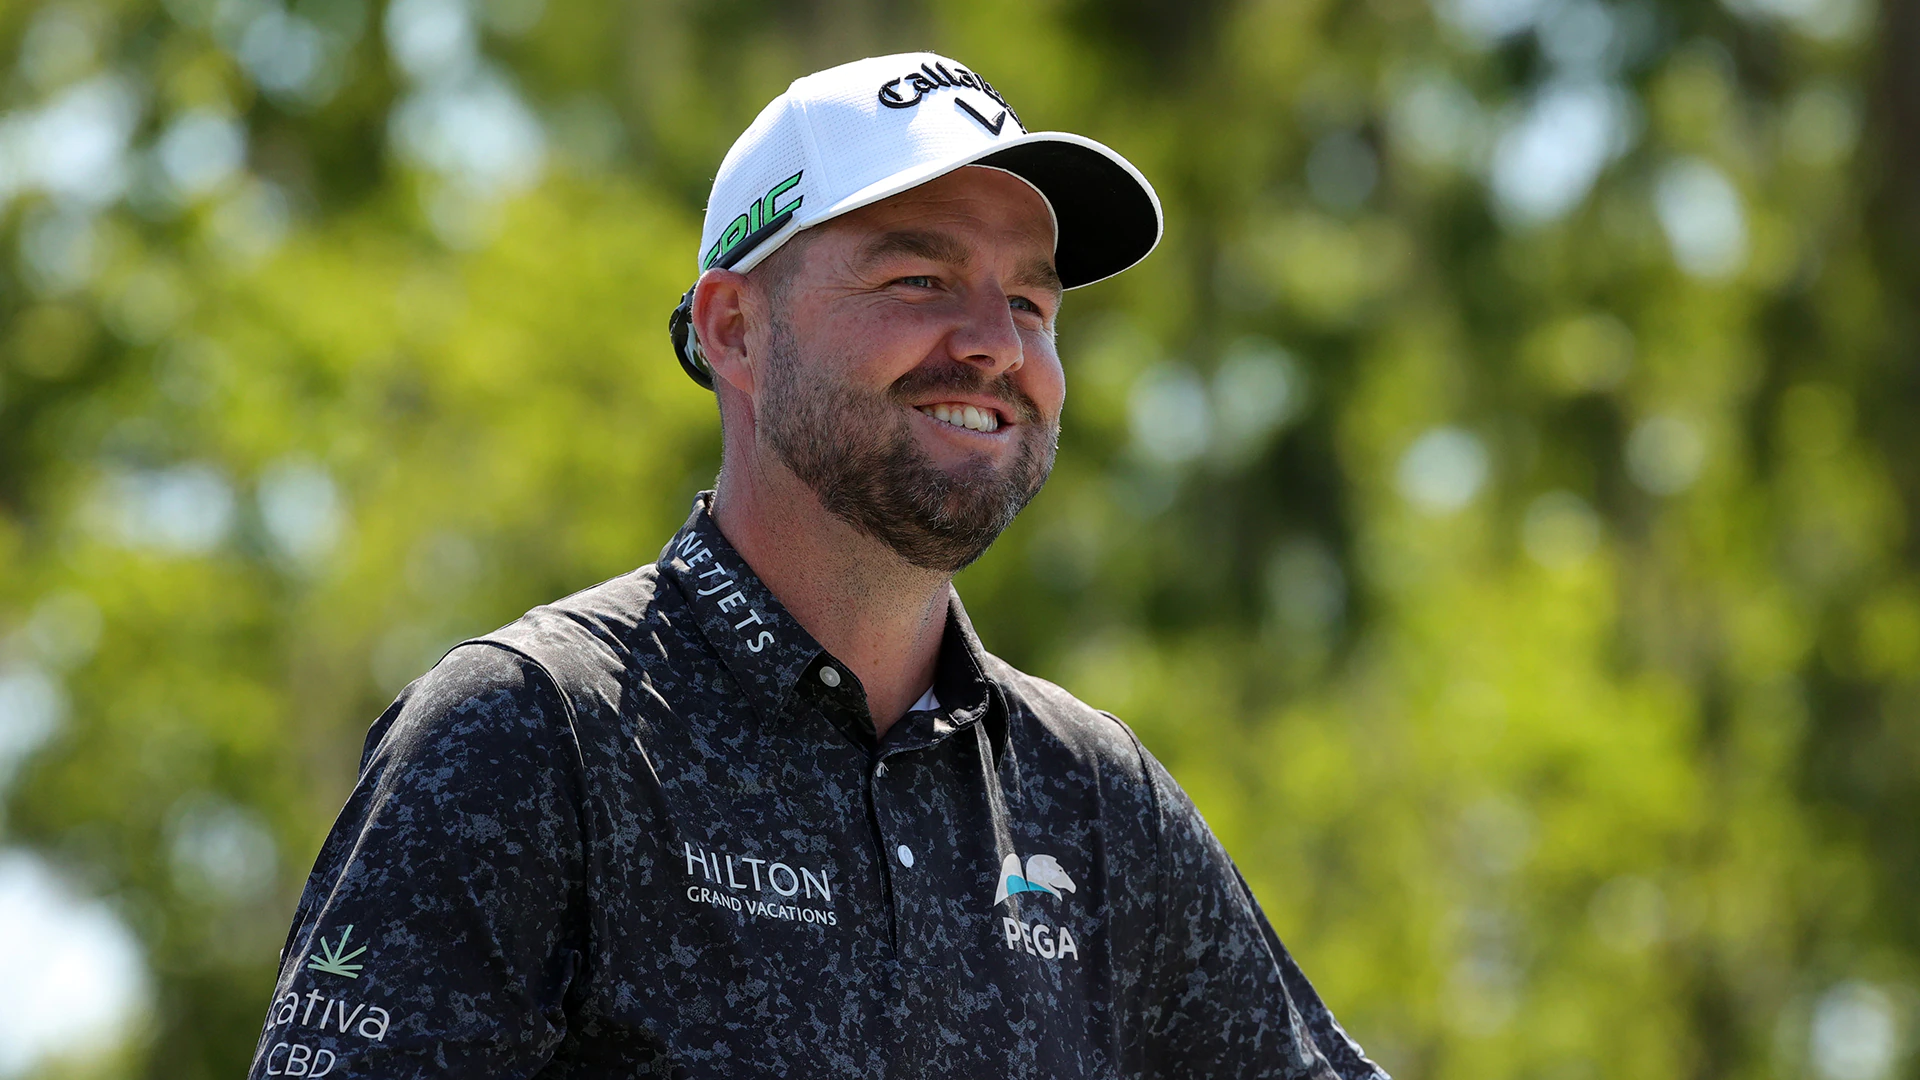 Marc Leishman sinks ace from 213 yards at AT&T Byron Nelson